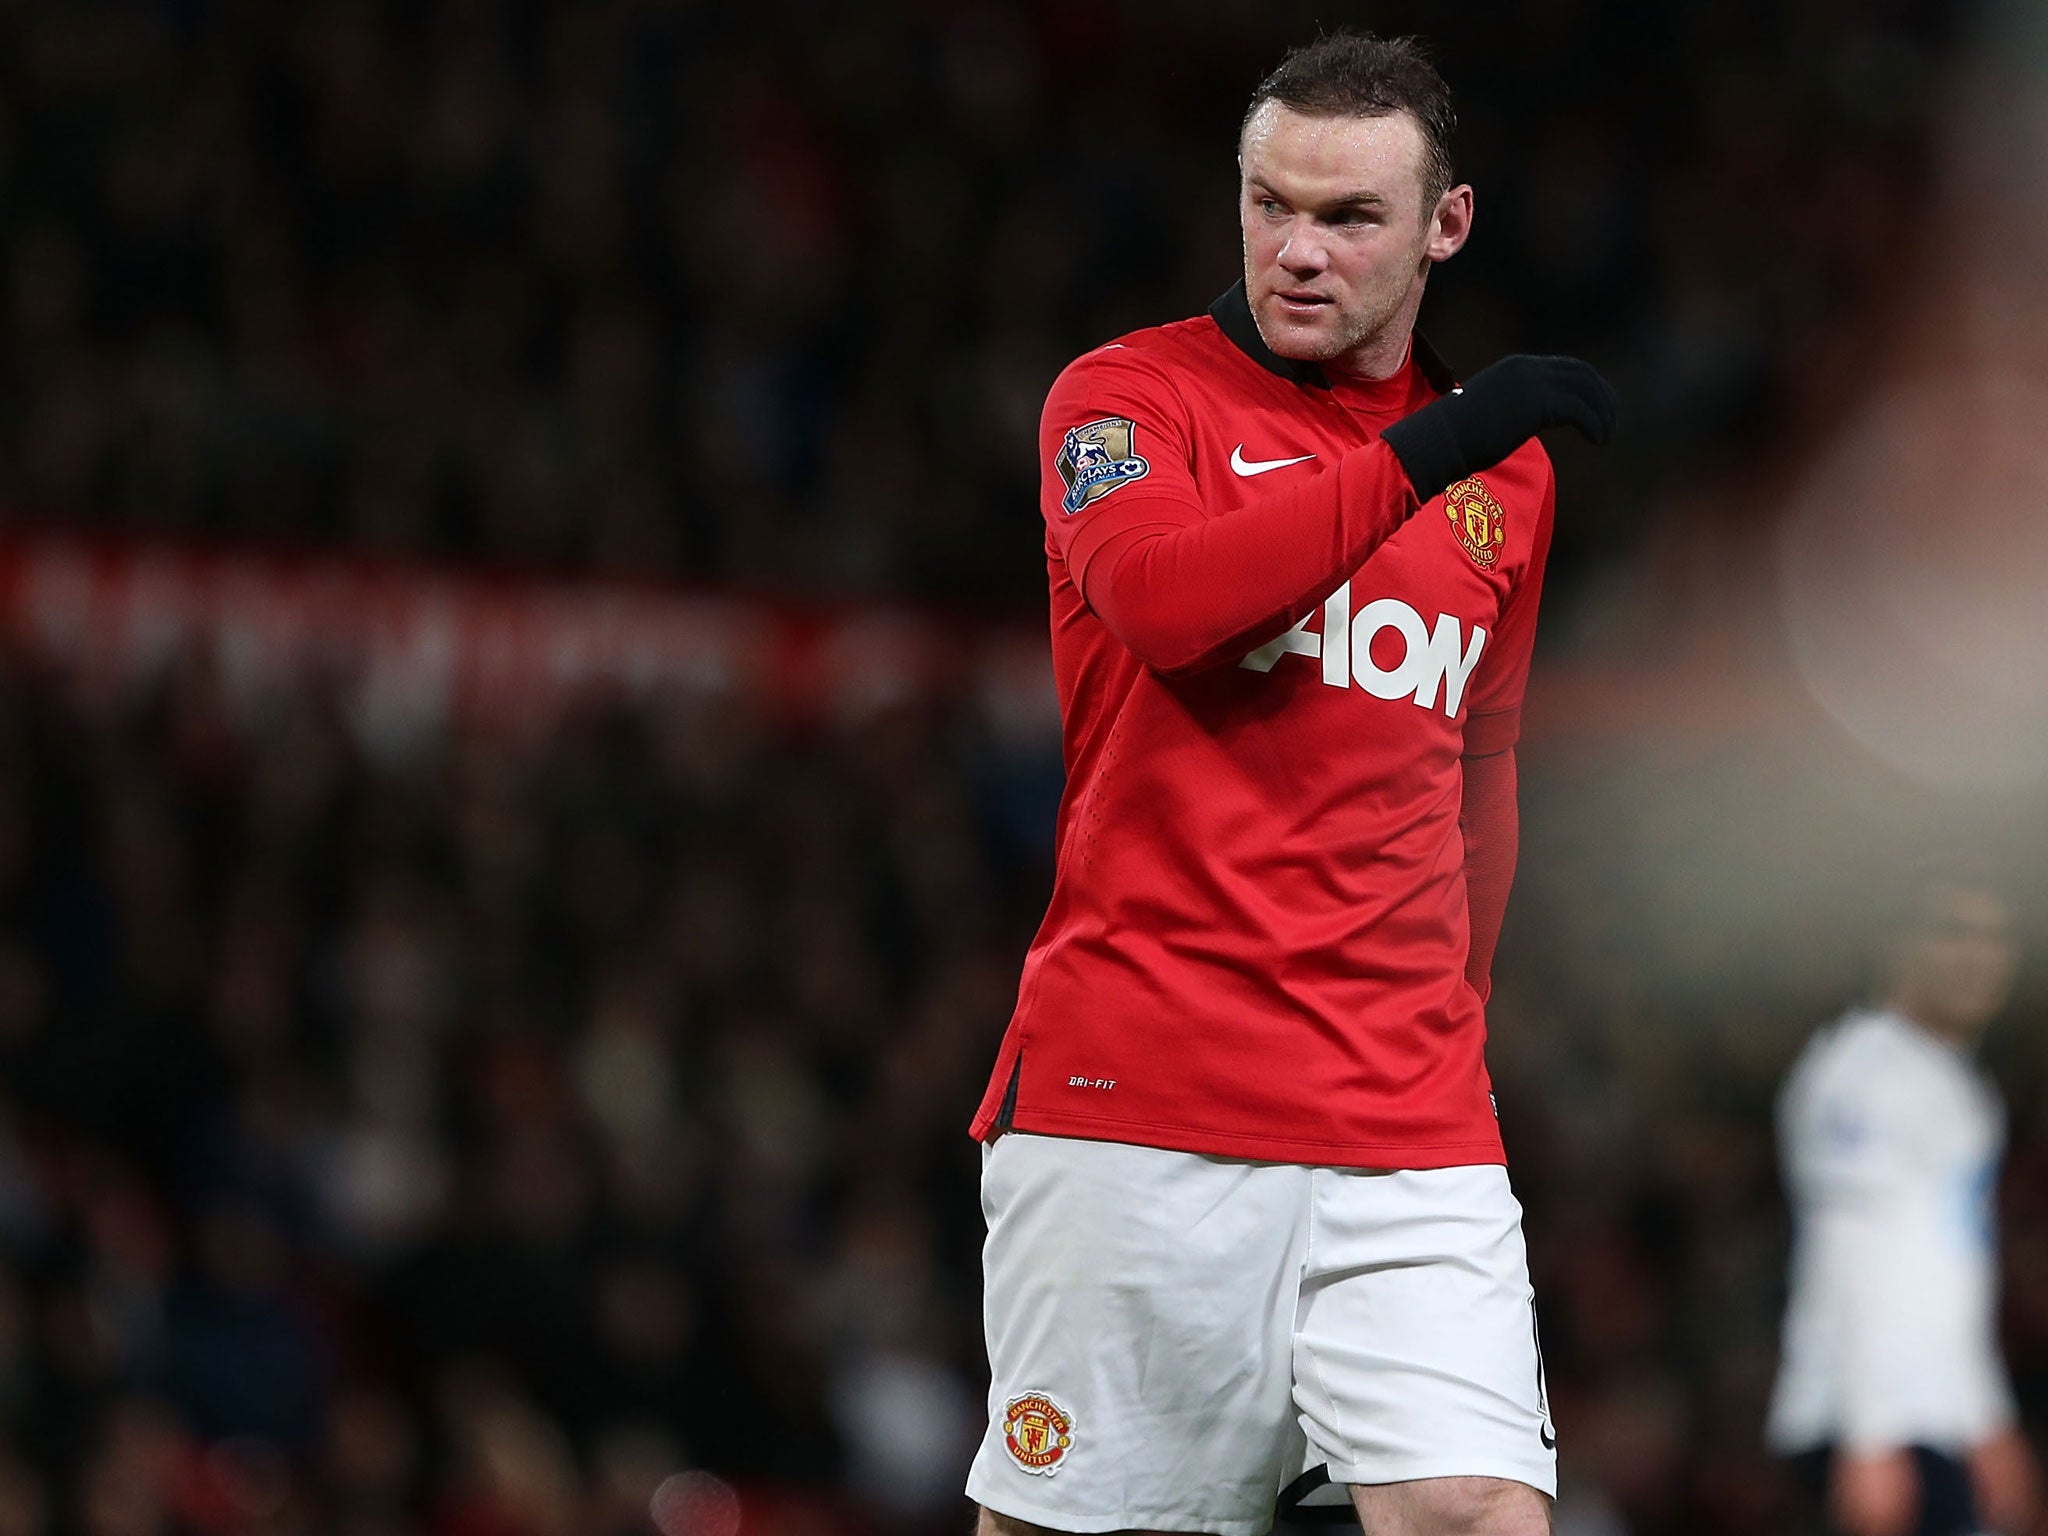 Jose Mourinho says he believes Manchester United will sell Wayne Rooney this summer